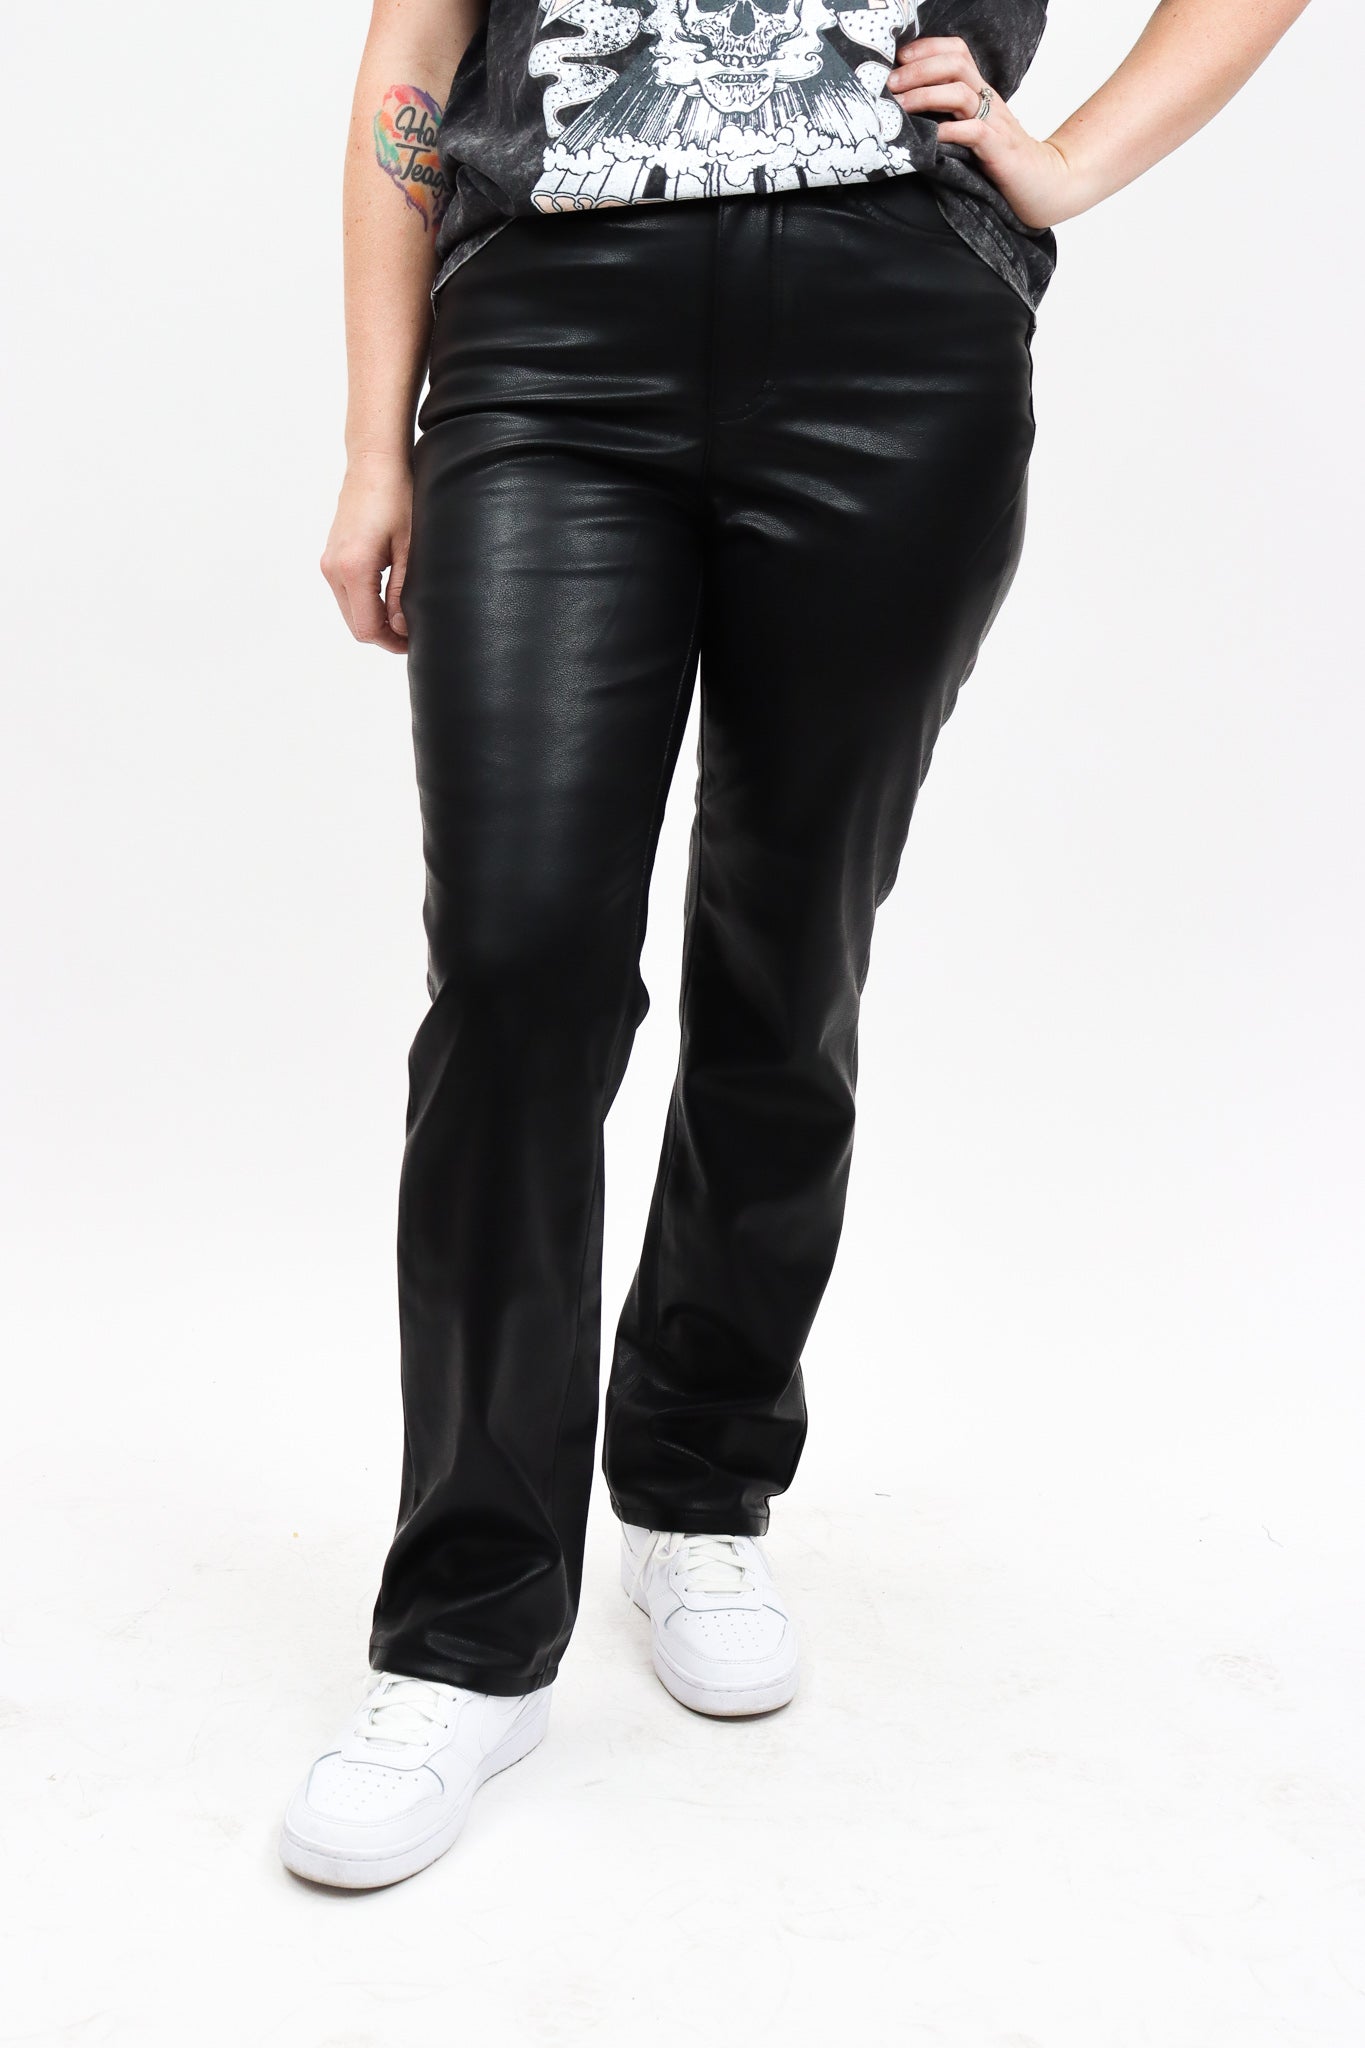 Judy Blue  Women's Tanya Control Top Faux Leather Pants in Black